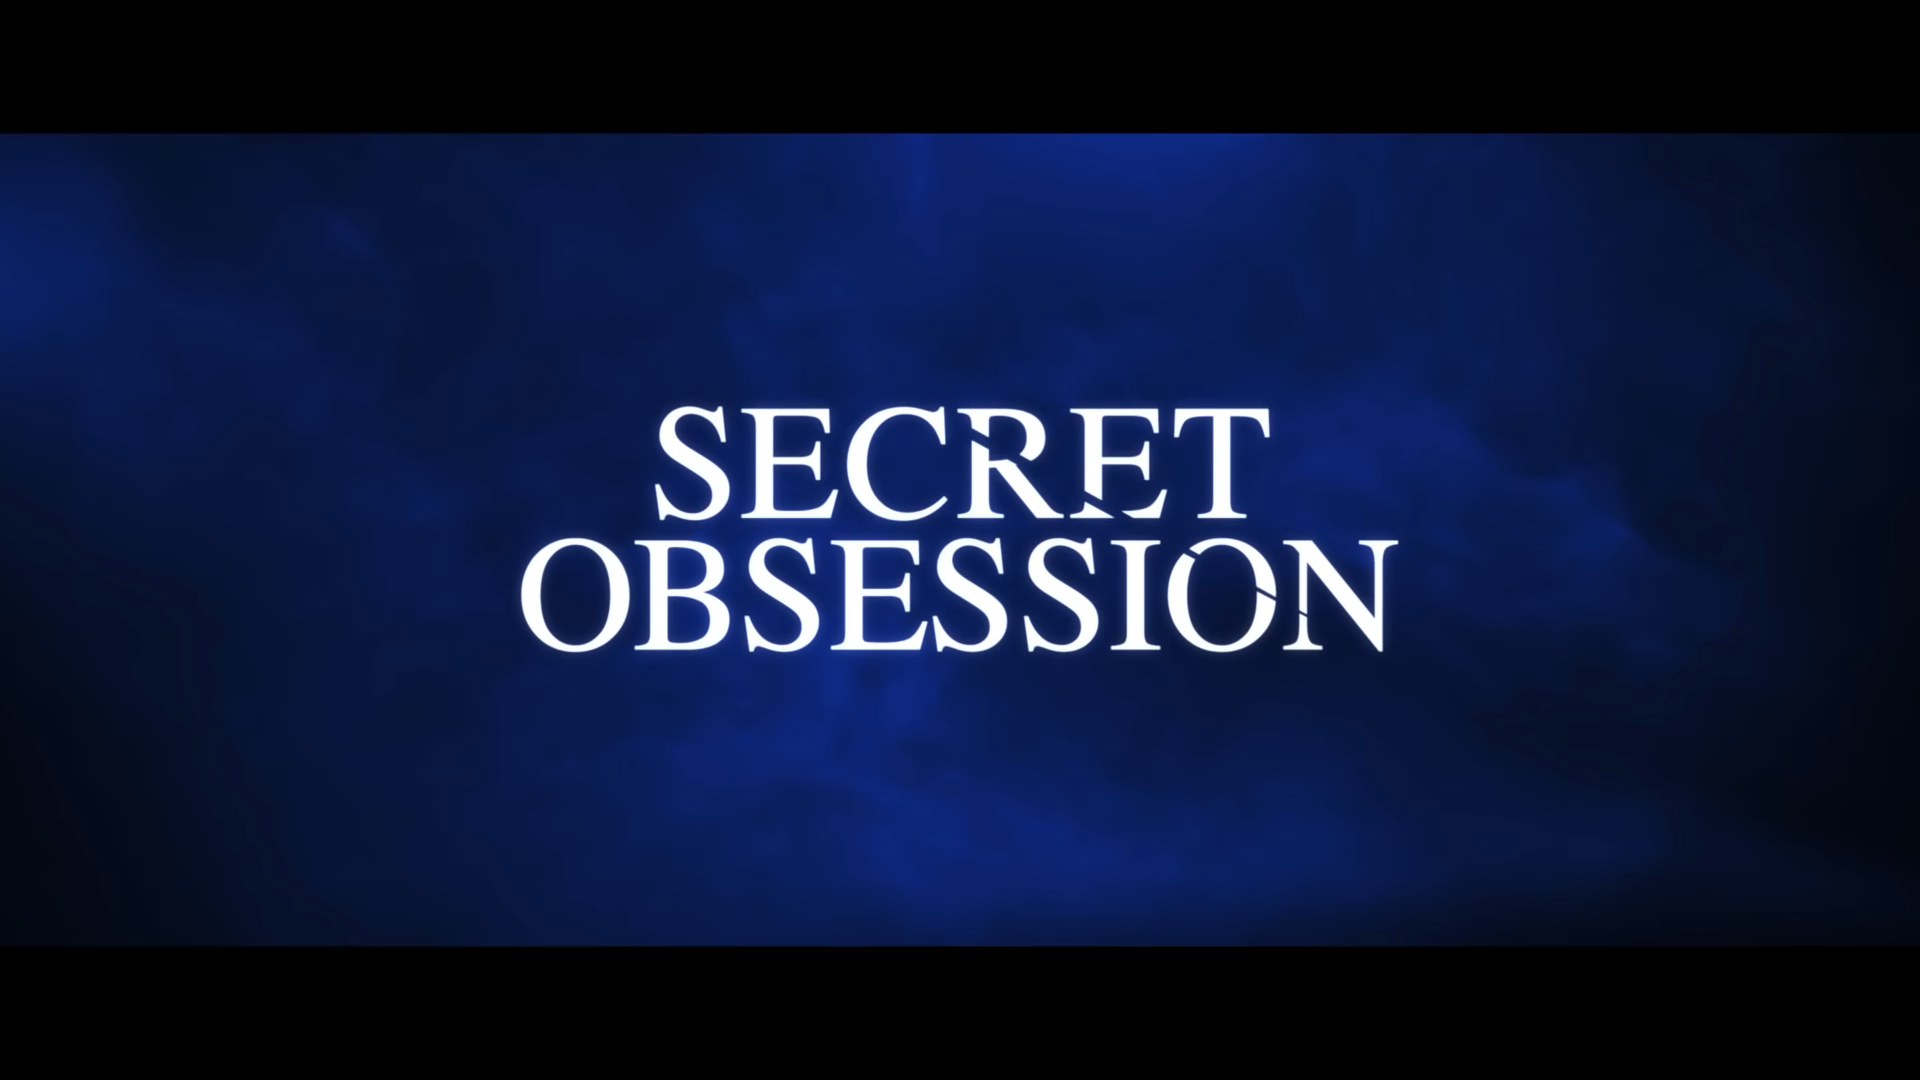 Secret Obsession [TRAILER] Coming to Netflix July 18, 2019